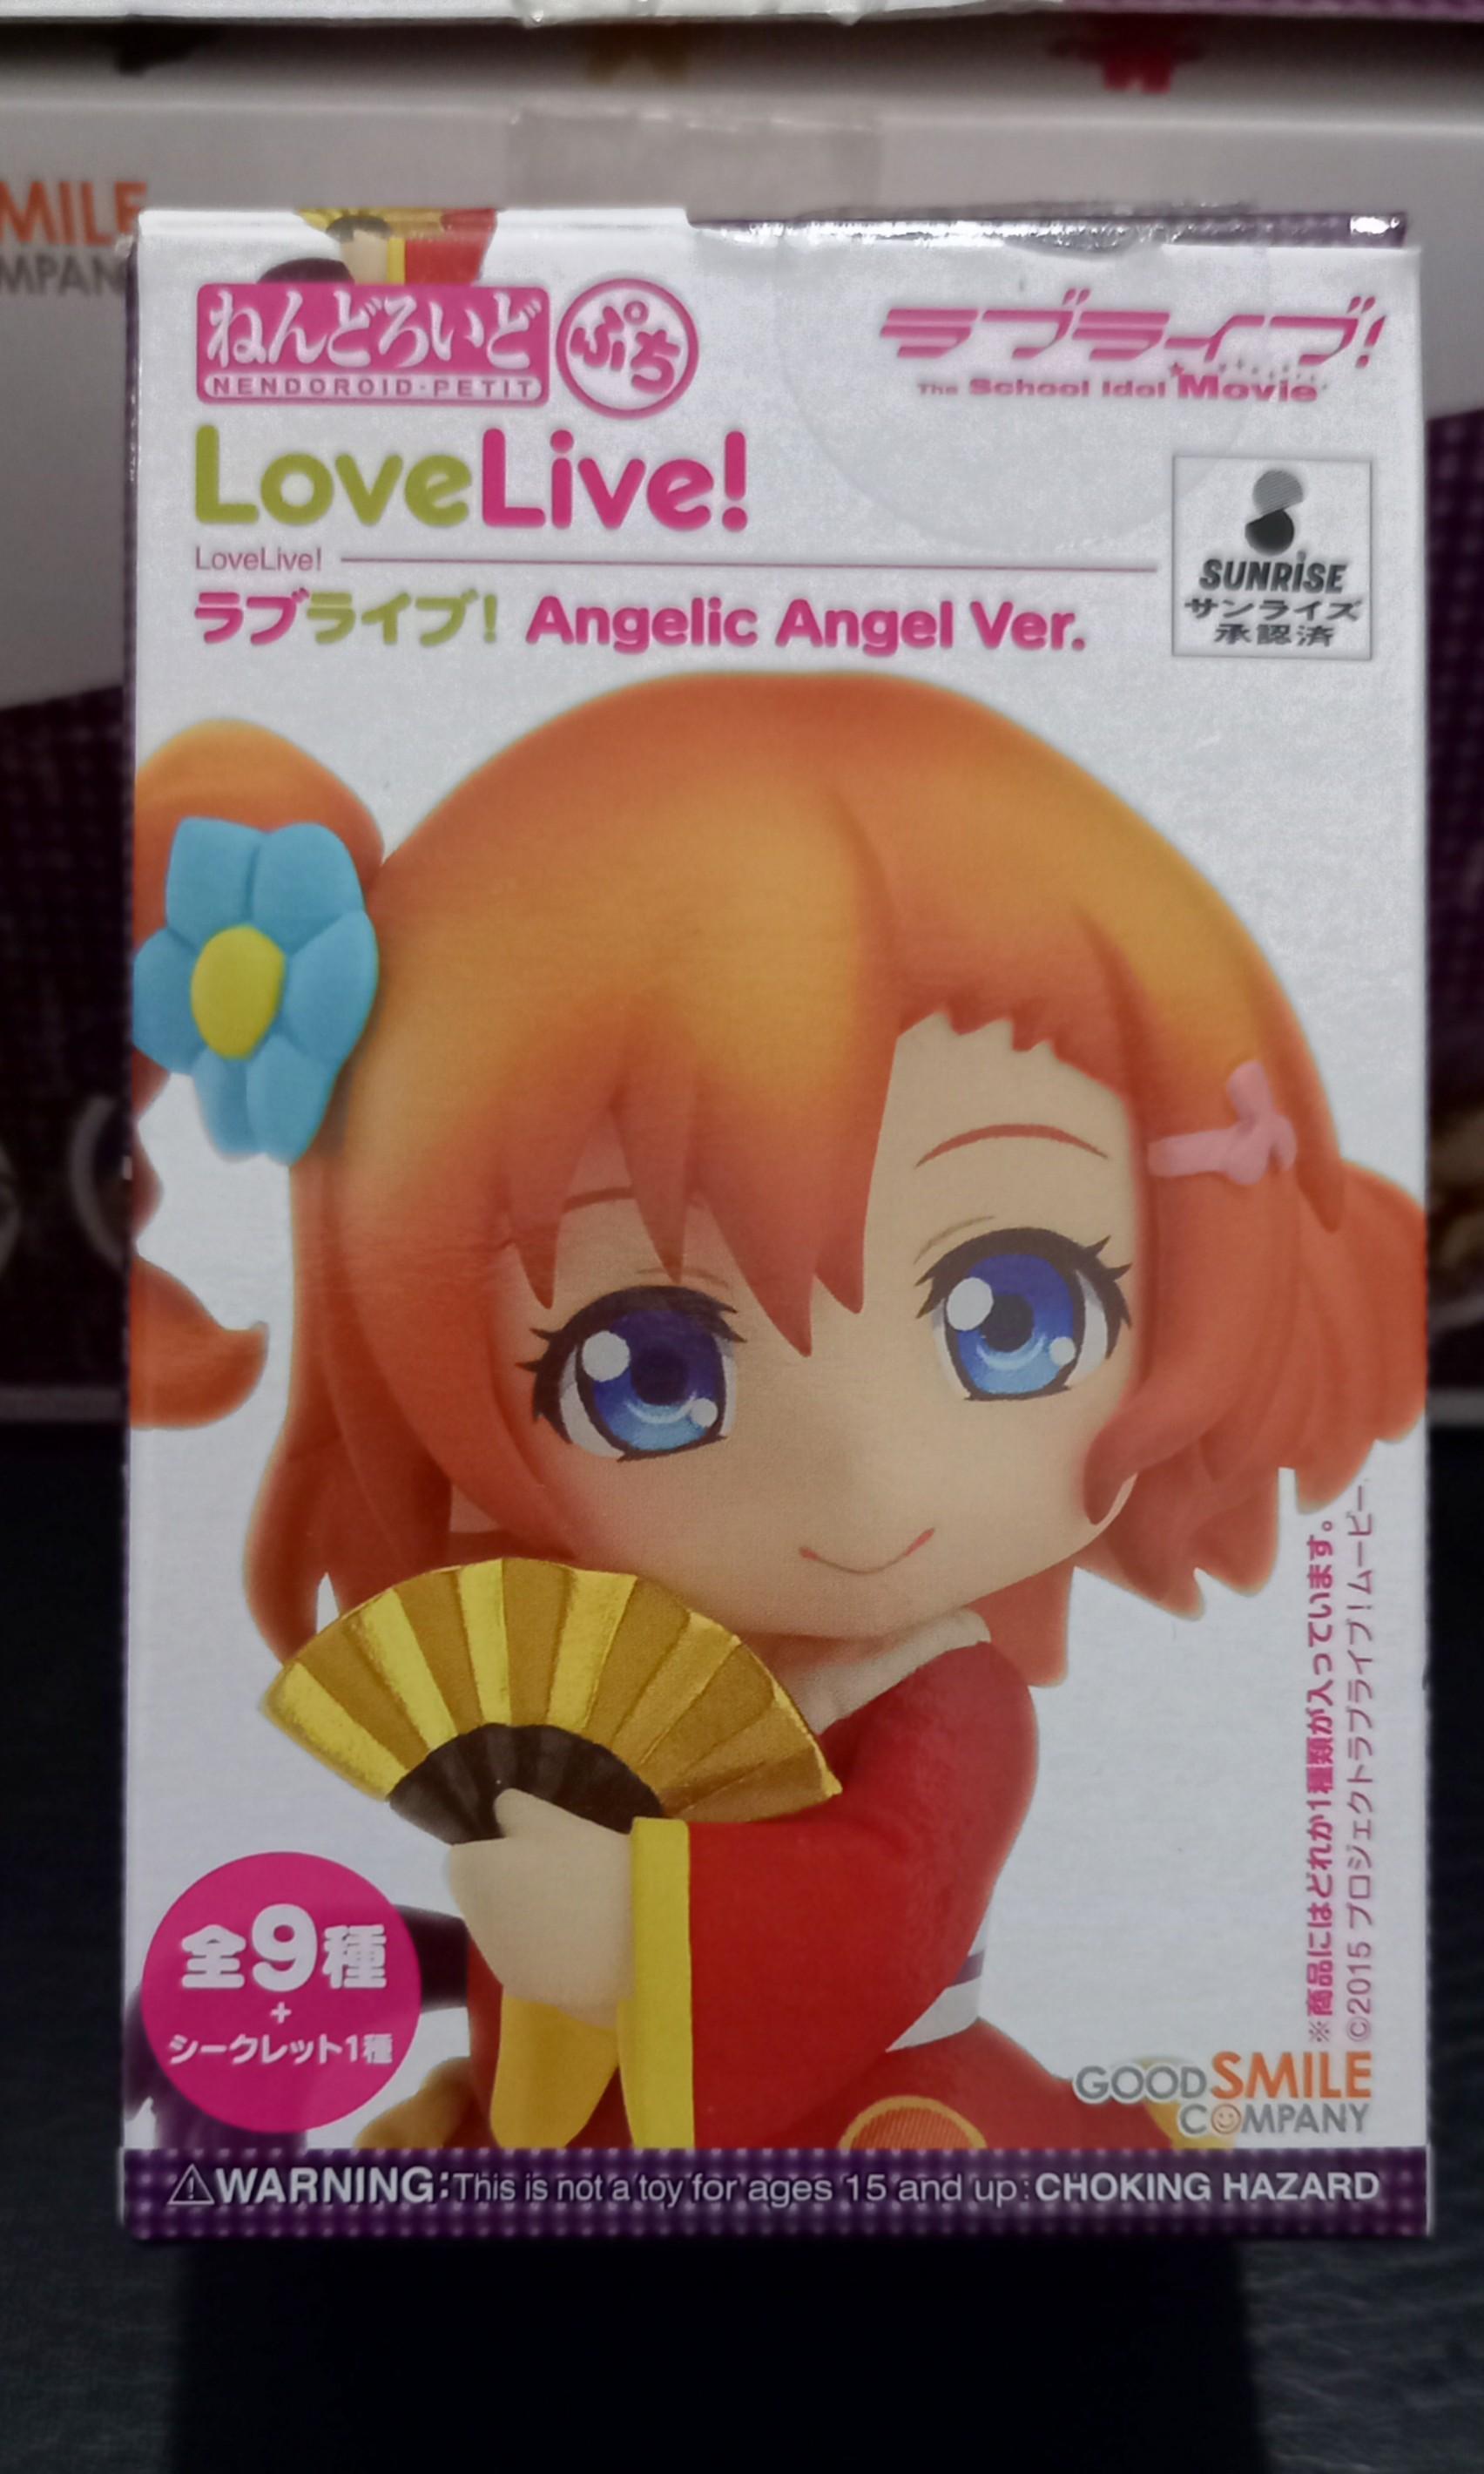 Love Live Angelic Angel Ver Hobbies Toys Memorabilia Collectibles J Pop On Carousell